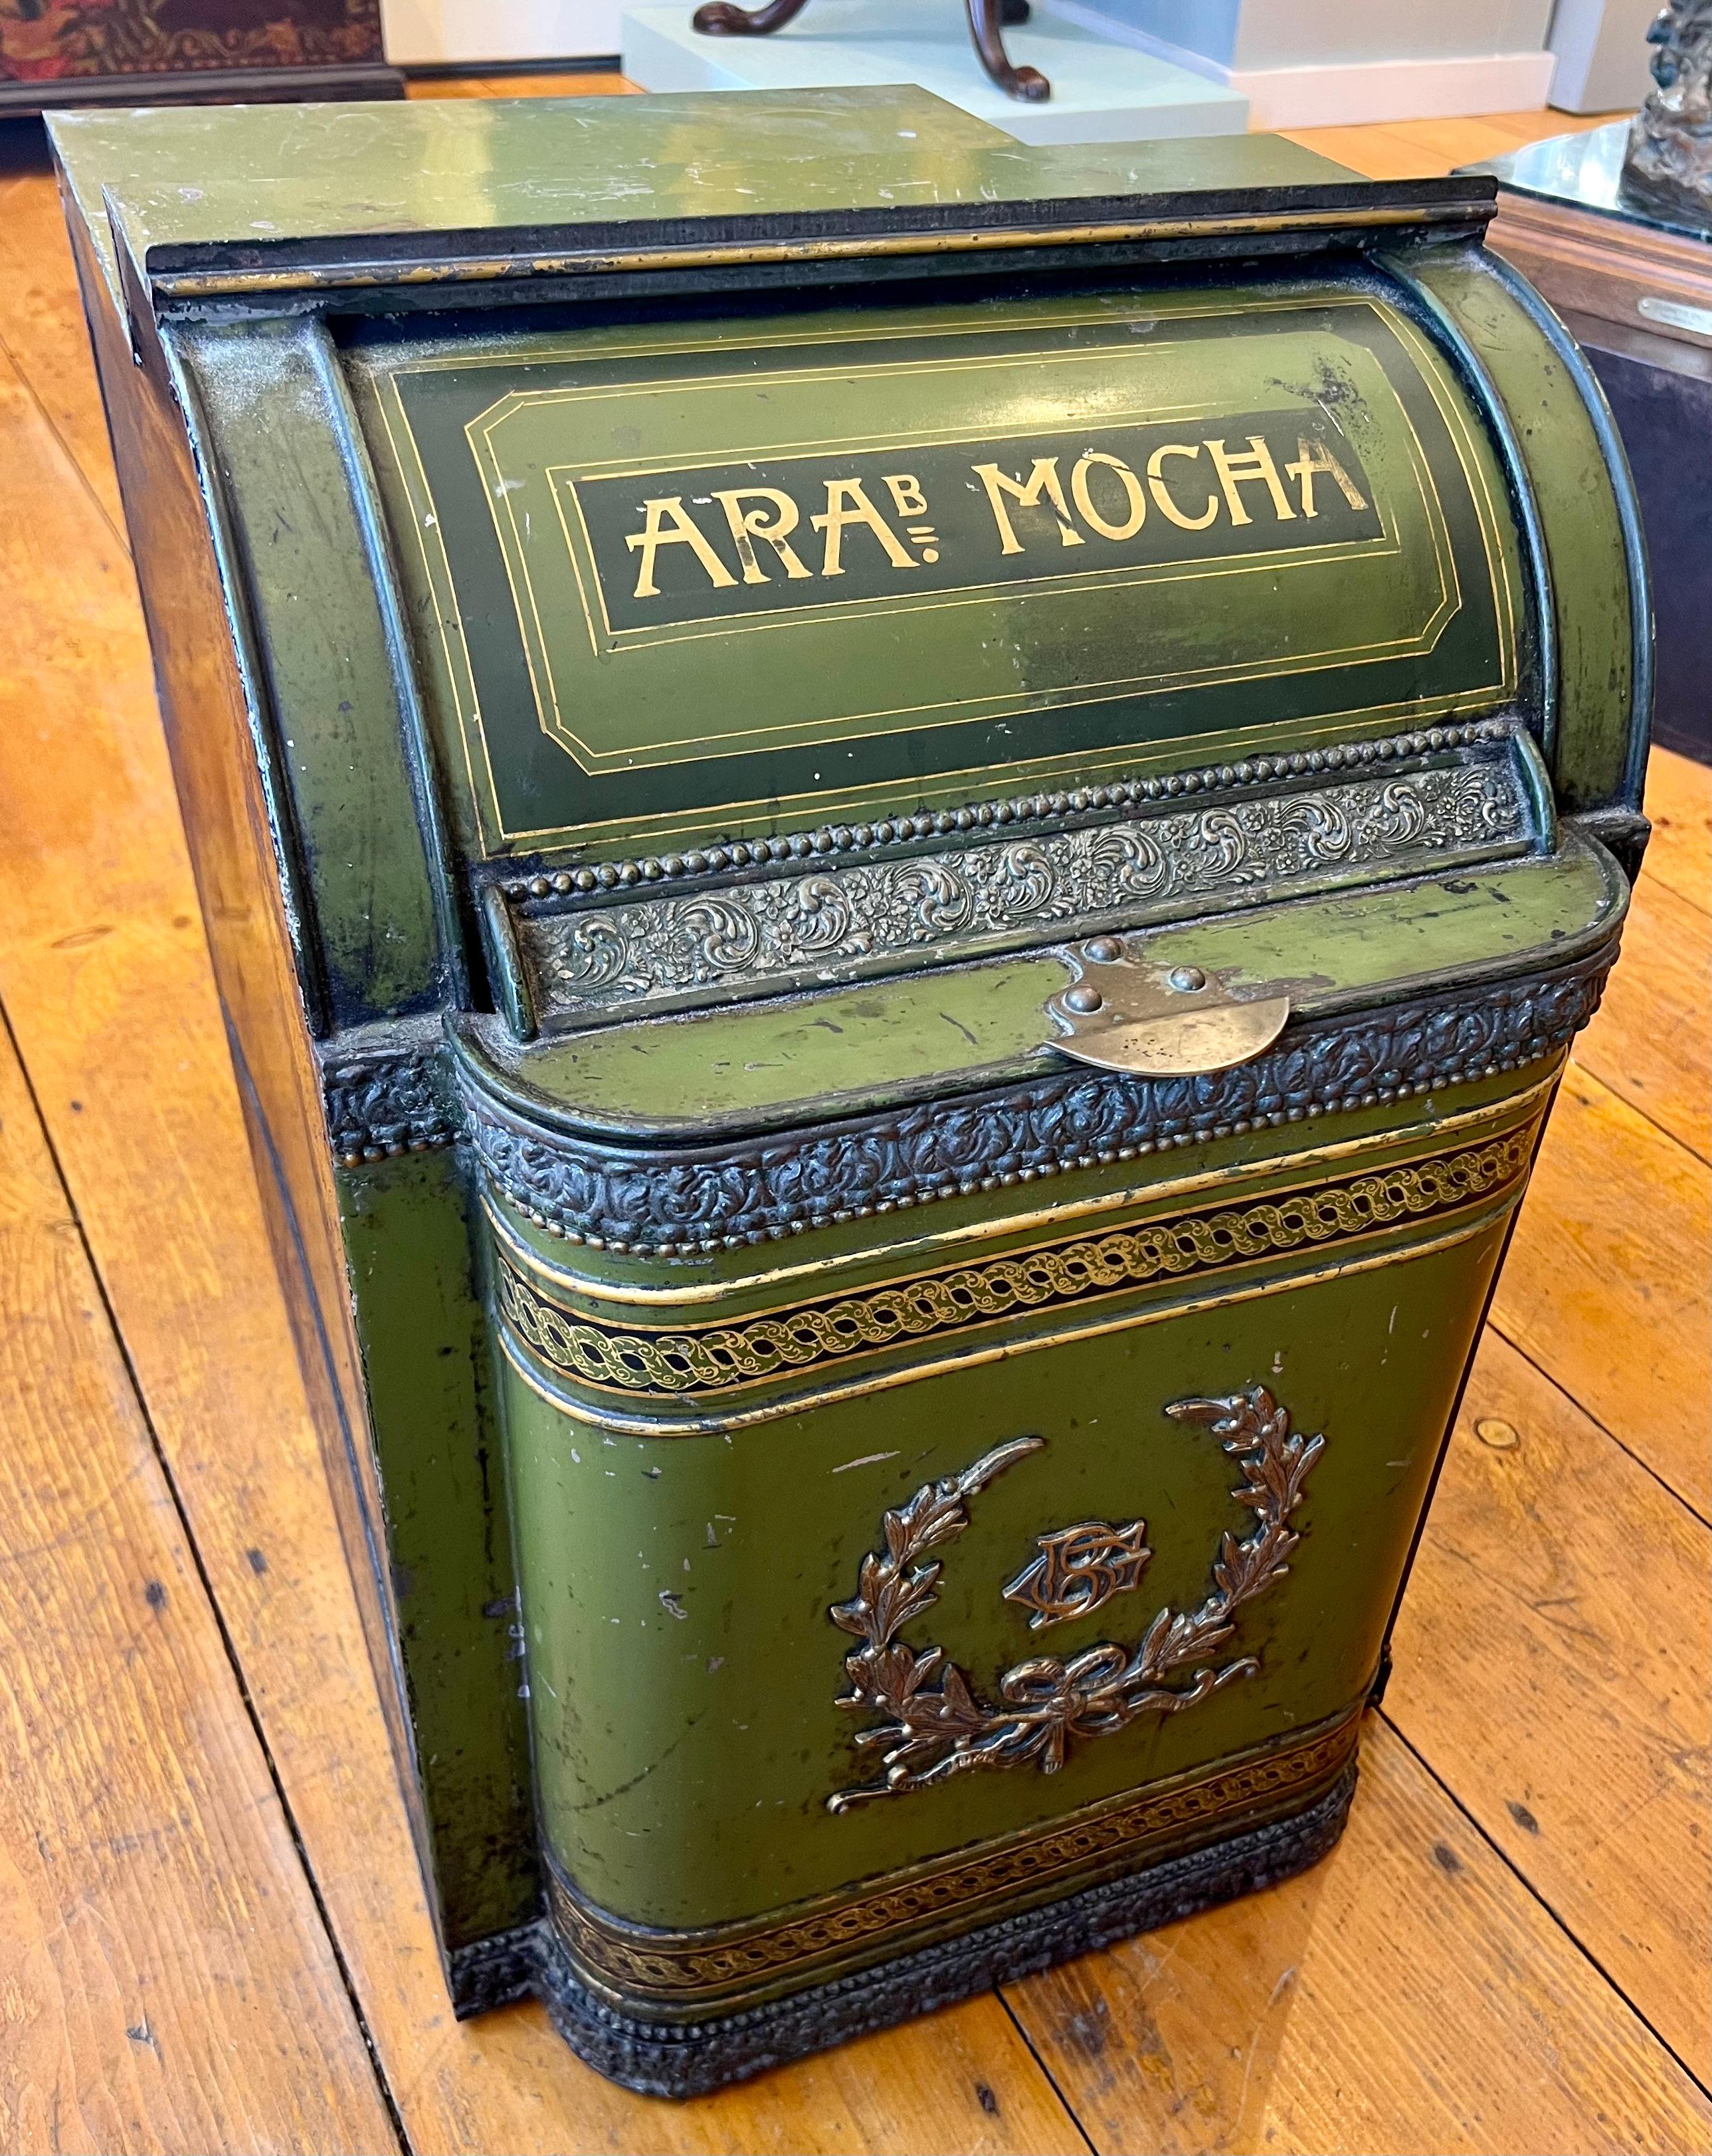 Amazing size and green color coffee bin from the 19th century. Features gilt scroll metal accents and initials lower center with the words Arabian Mocha hand painted on the front. The bin is in overall good condition with some scrapes as would be